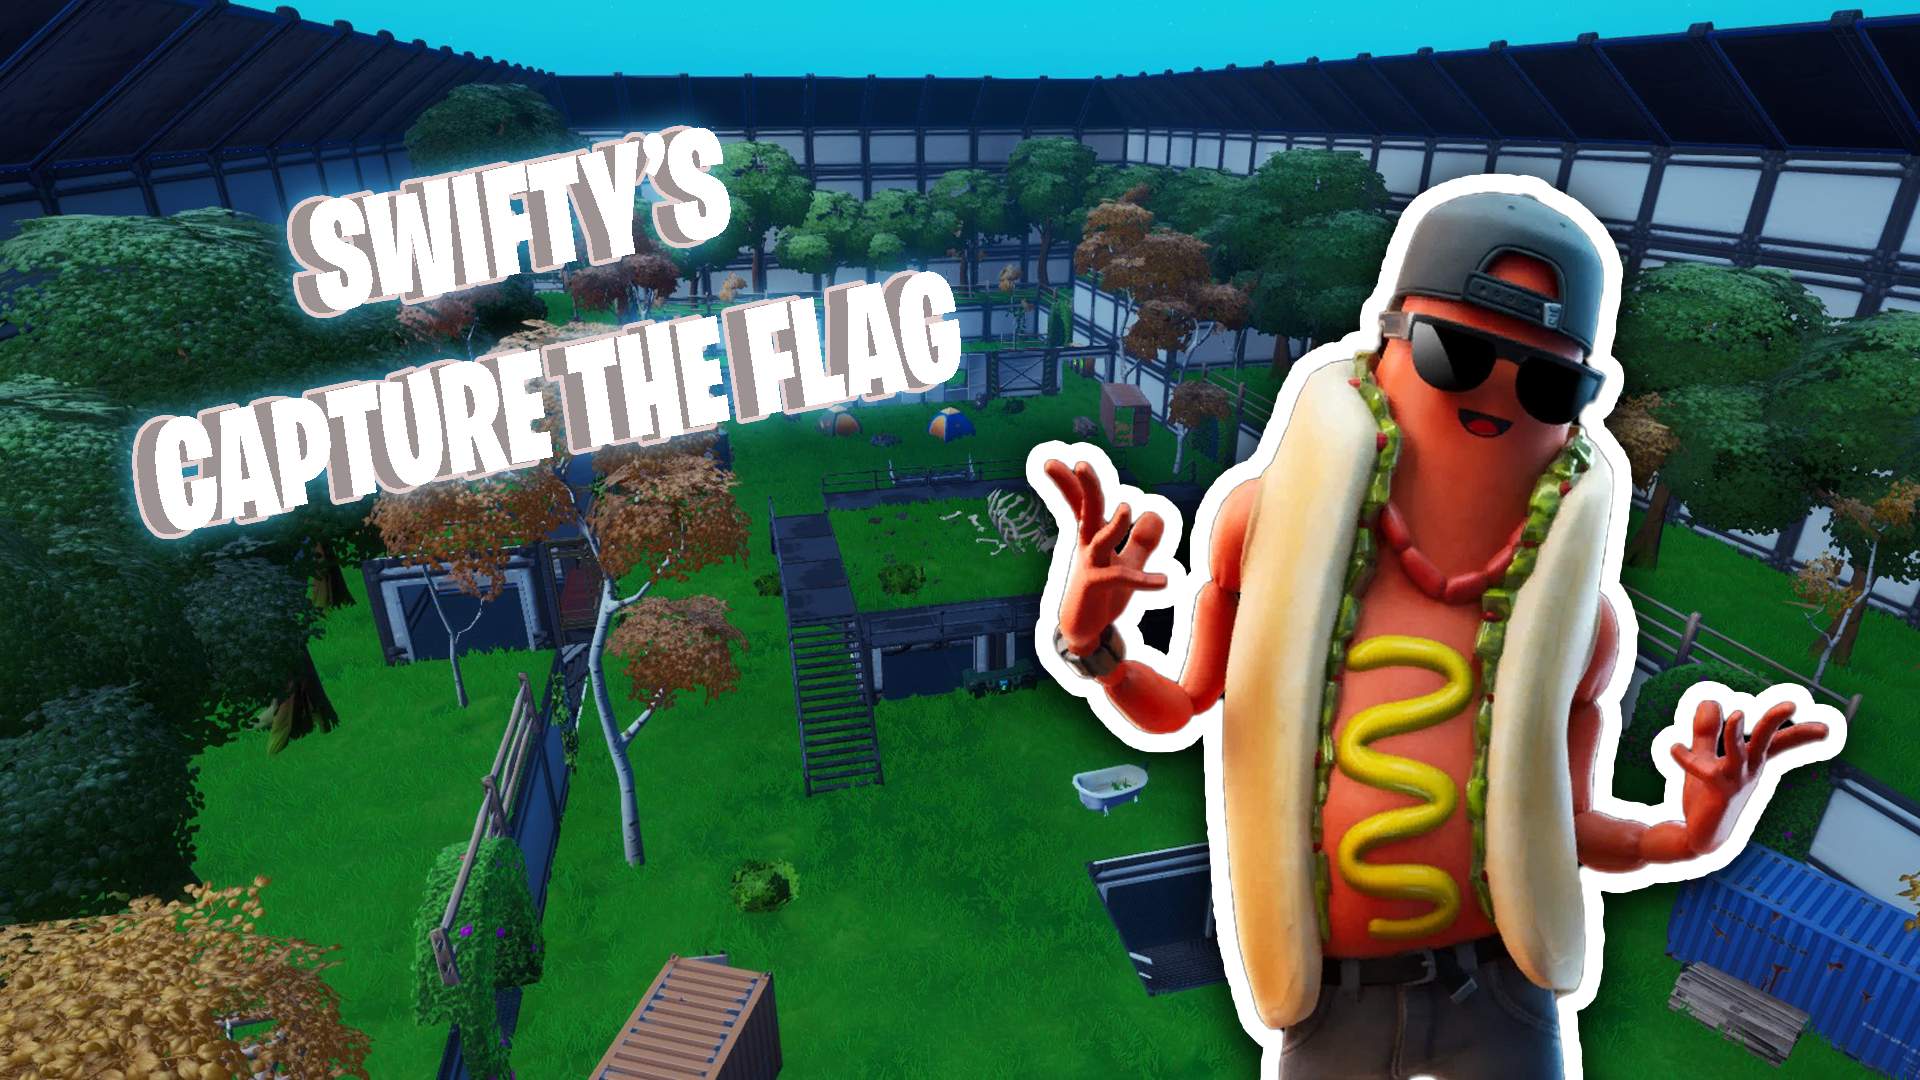 SWIFTY'S CAPTURE THE FLAG